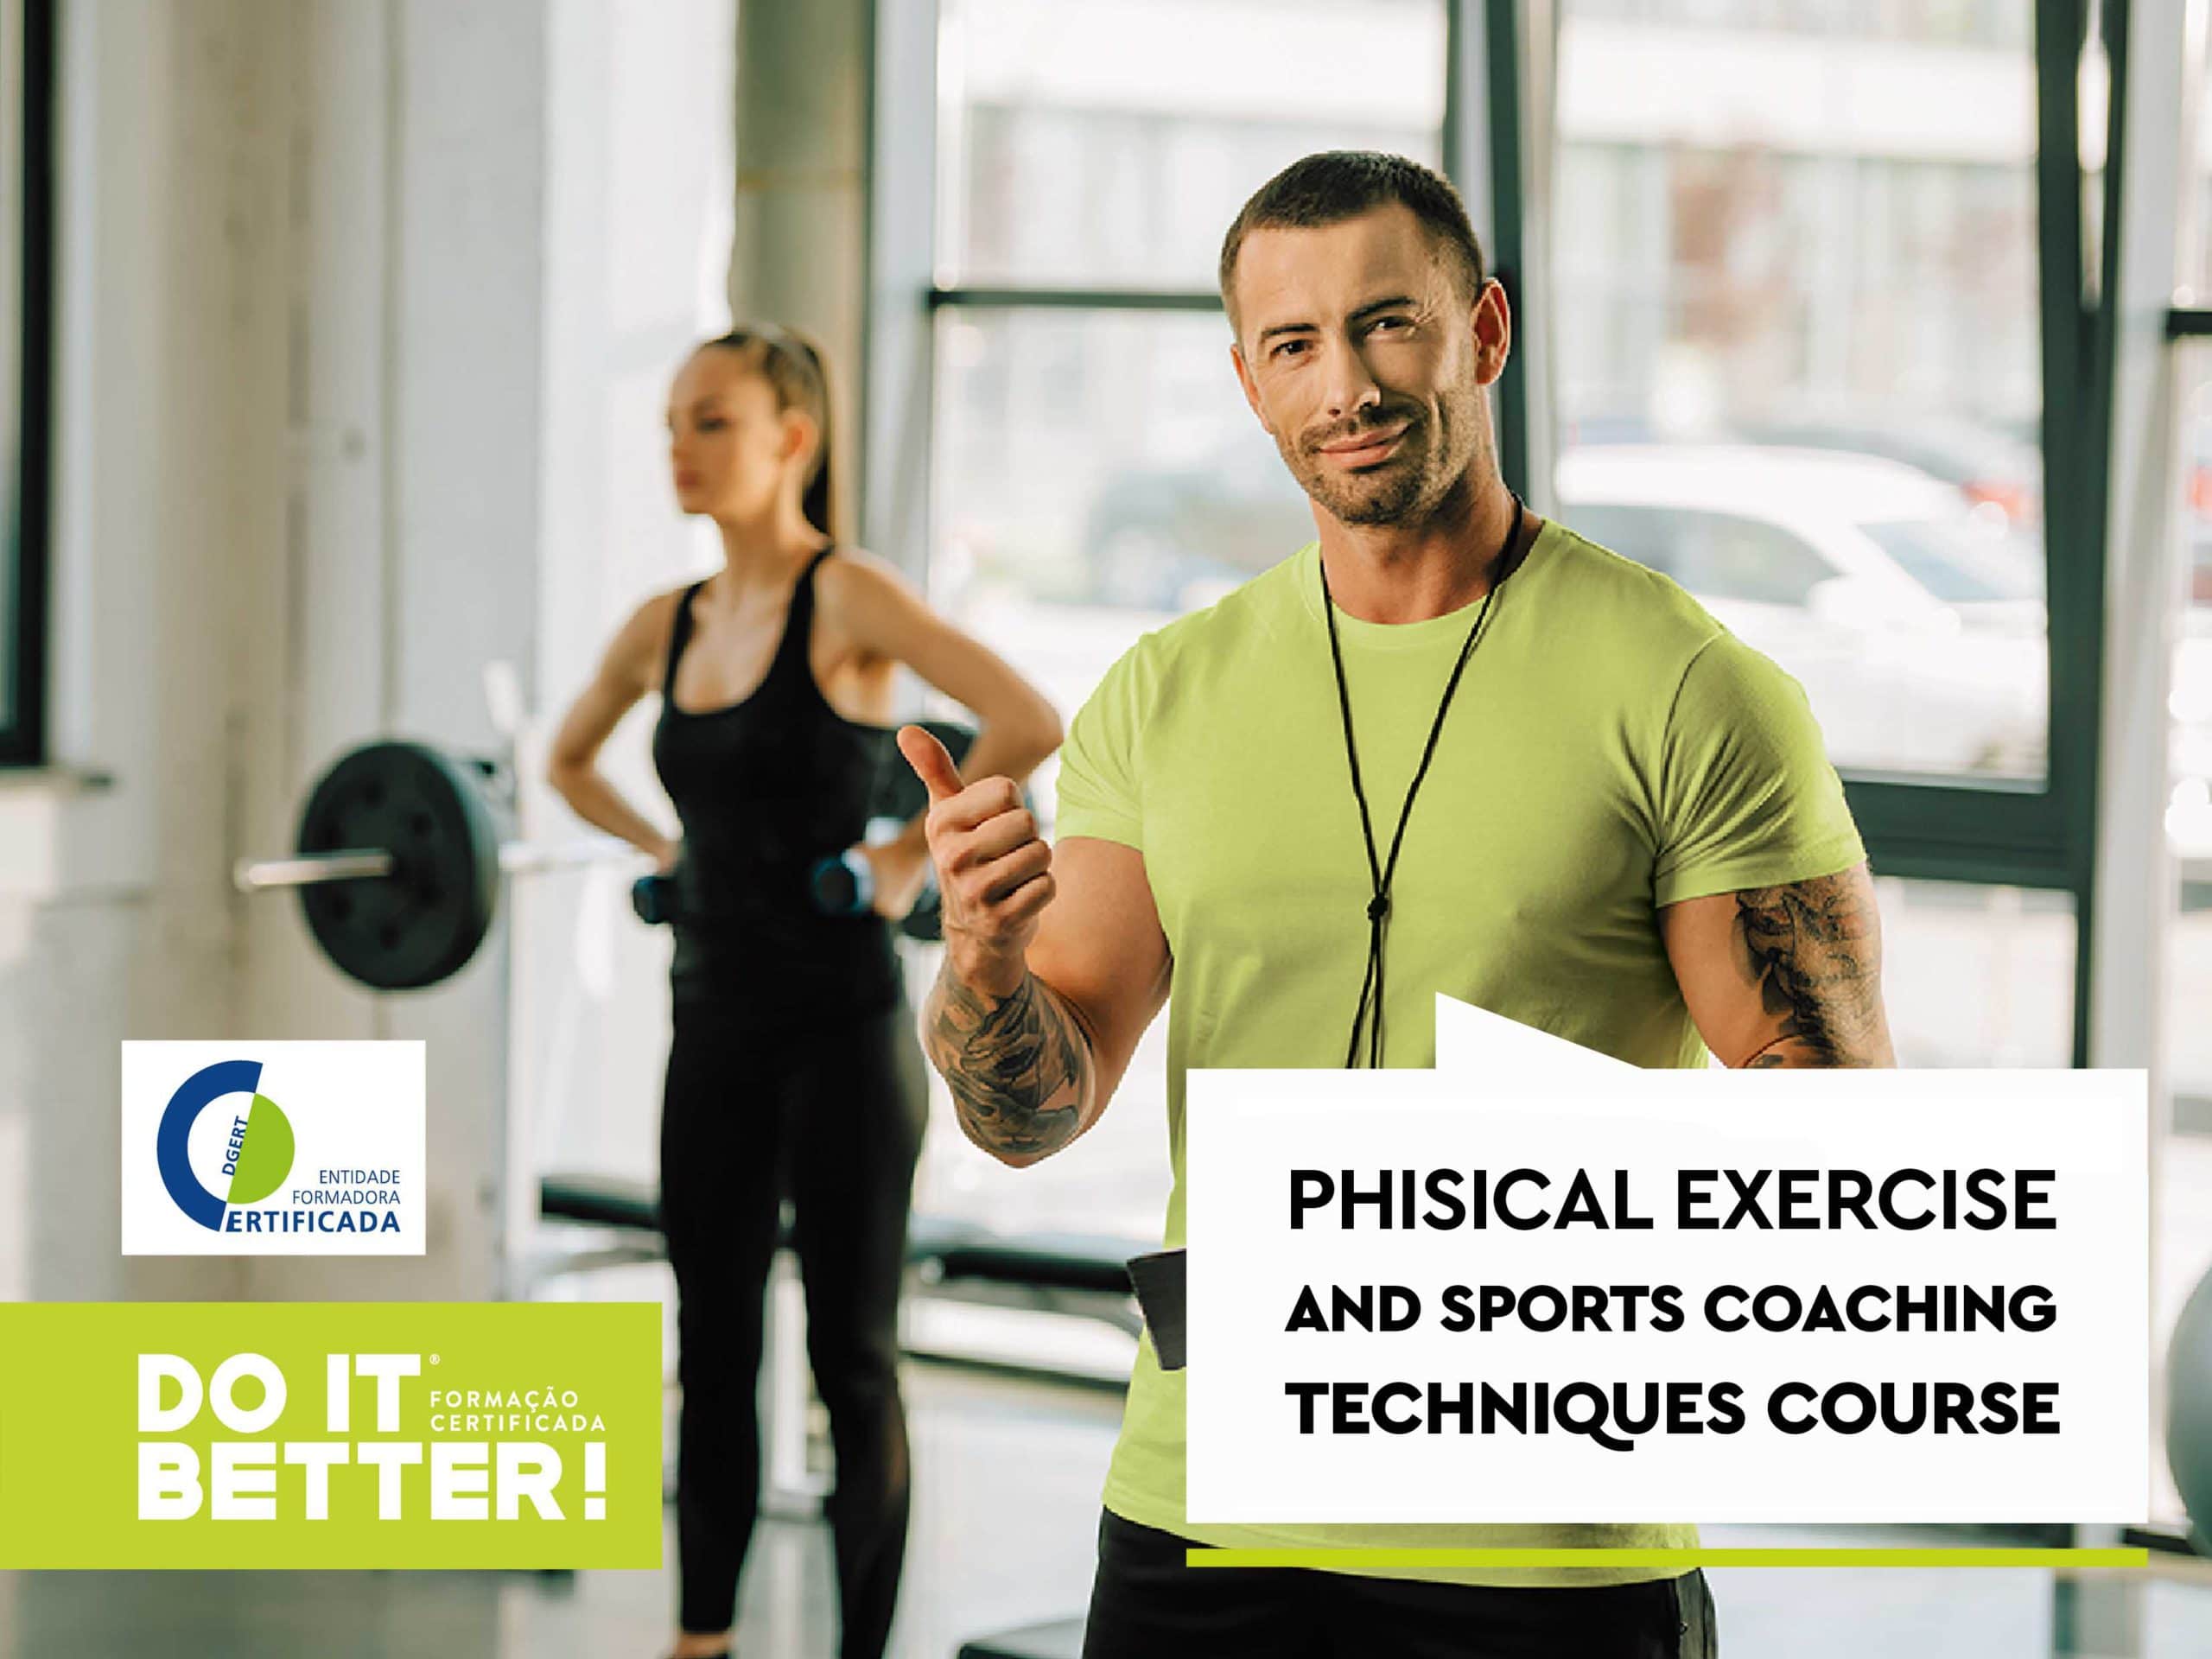 Phisical Exercise and Sports Coaching